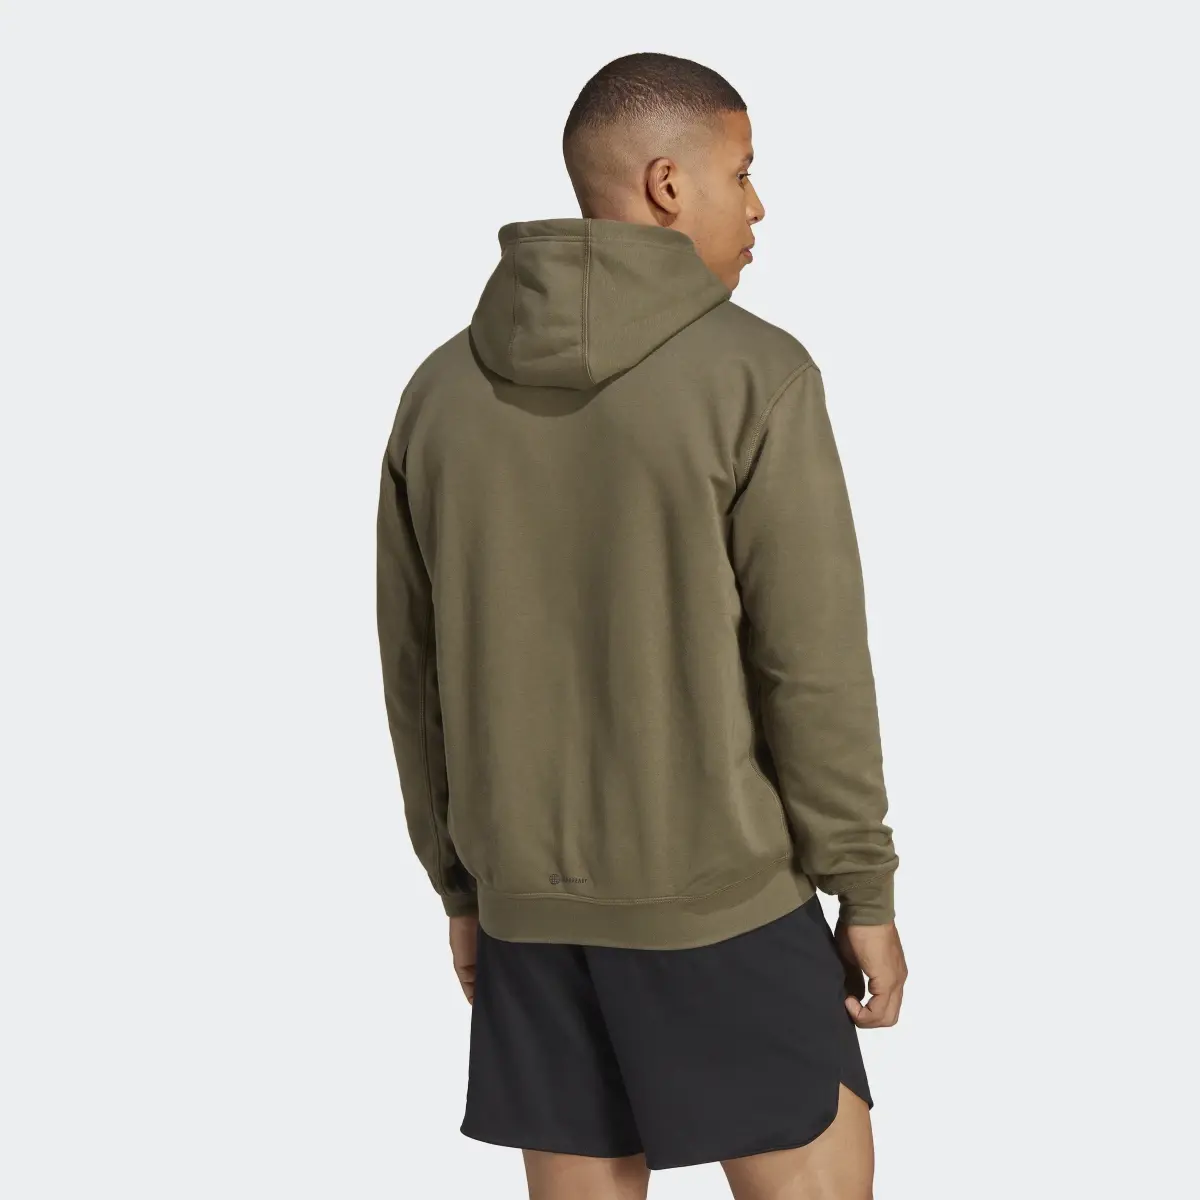 Adidas Curated by Cody Rigsby HIIT Hoodie. 3